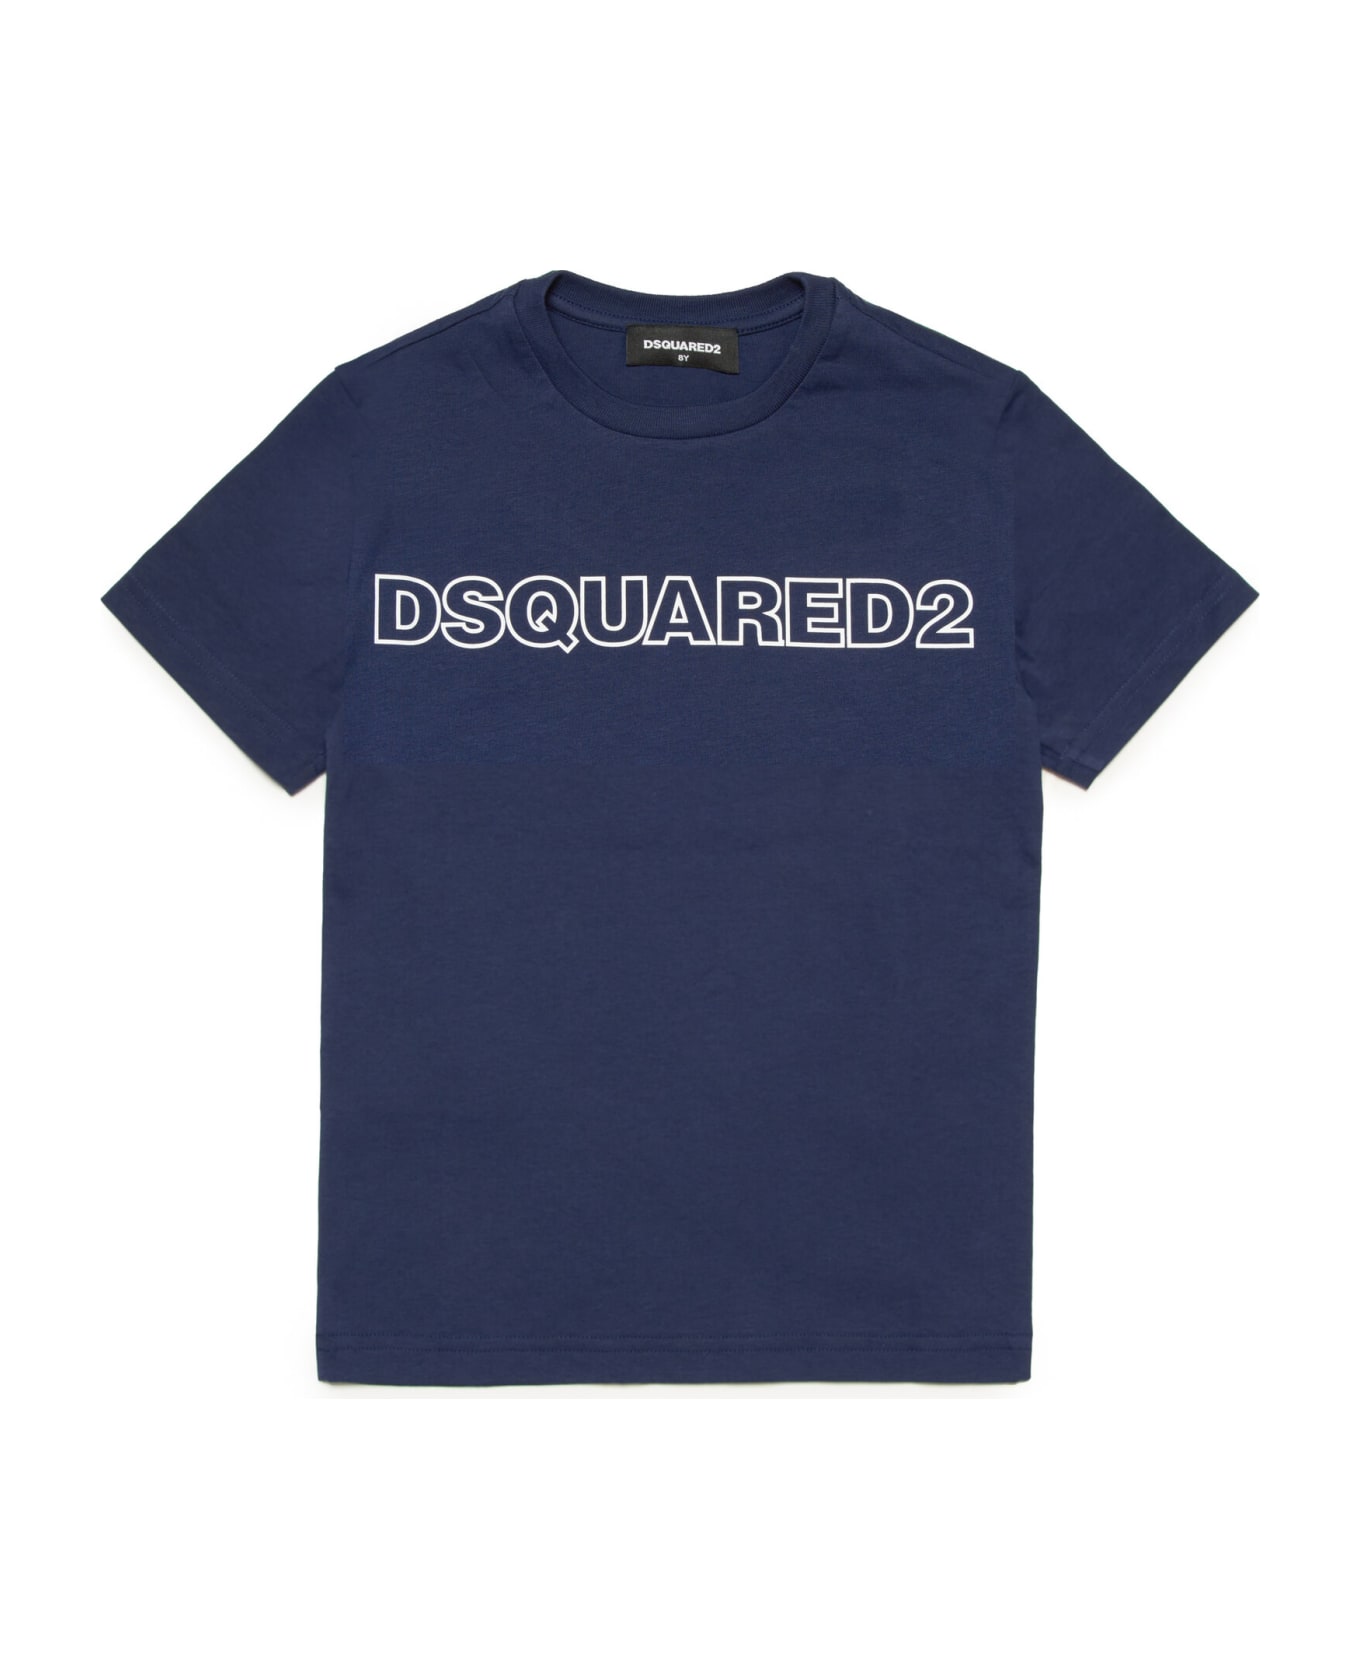 Dsquared2 D2t948u Relax T-shirt Dsquared Crew-neck, Short-sleeved, Cotton Jersey T-shirt. Fit: Relaxed Fit, Regular. The Garment Features 's Contrastin - Blu